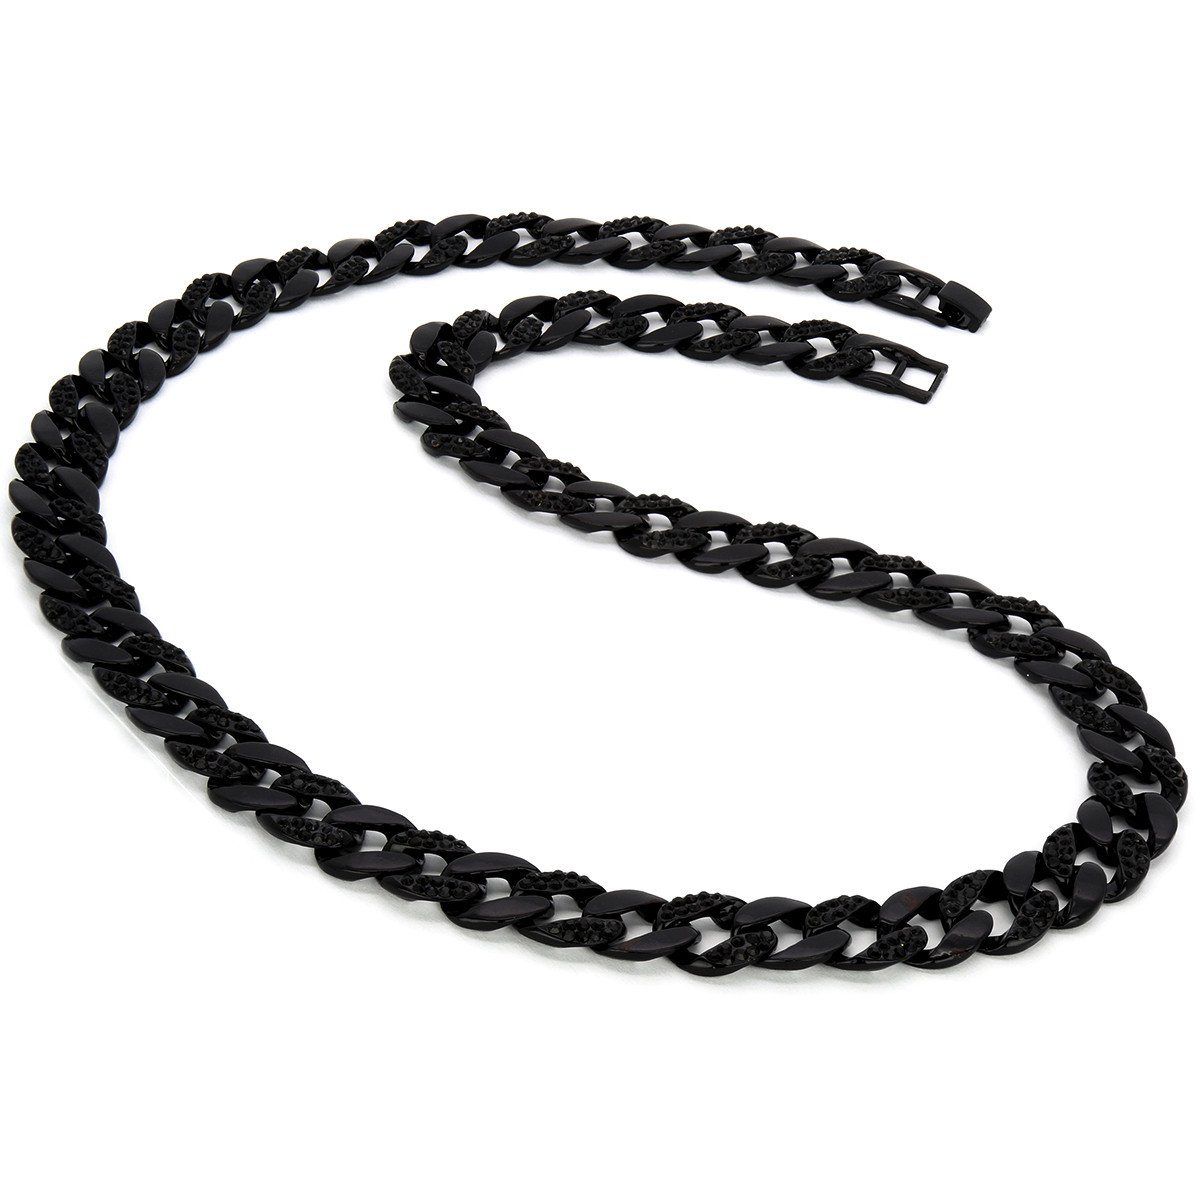 Black Plated Cuban Half Cz Chain Necklace 15mm 30" Inches